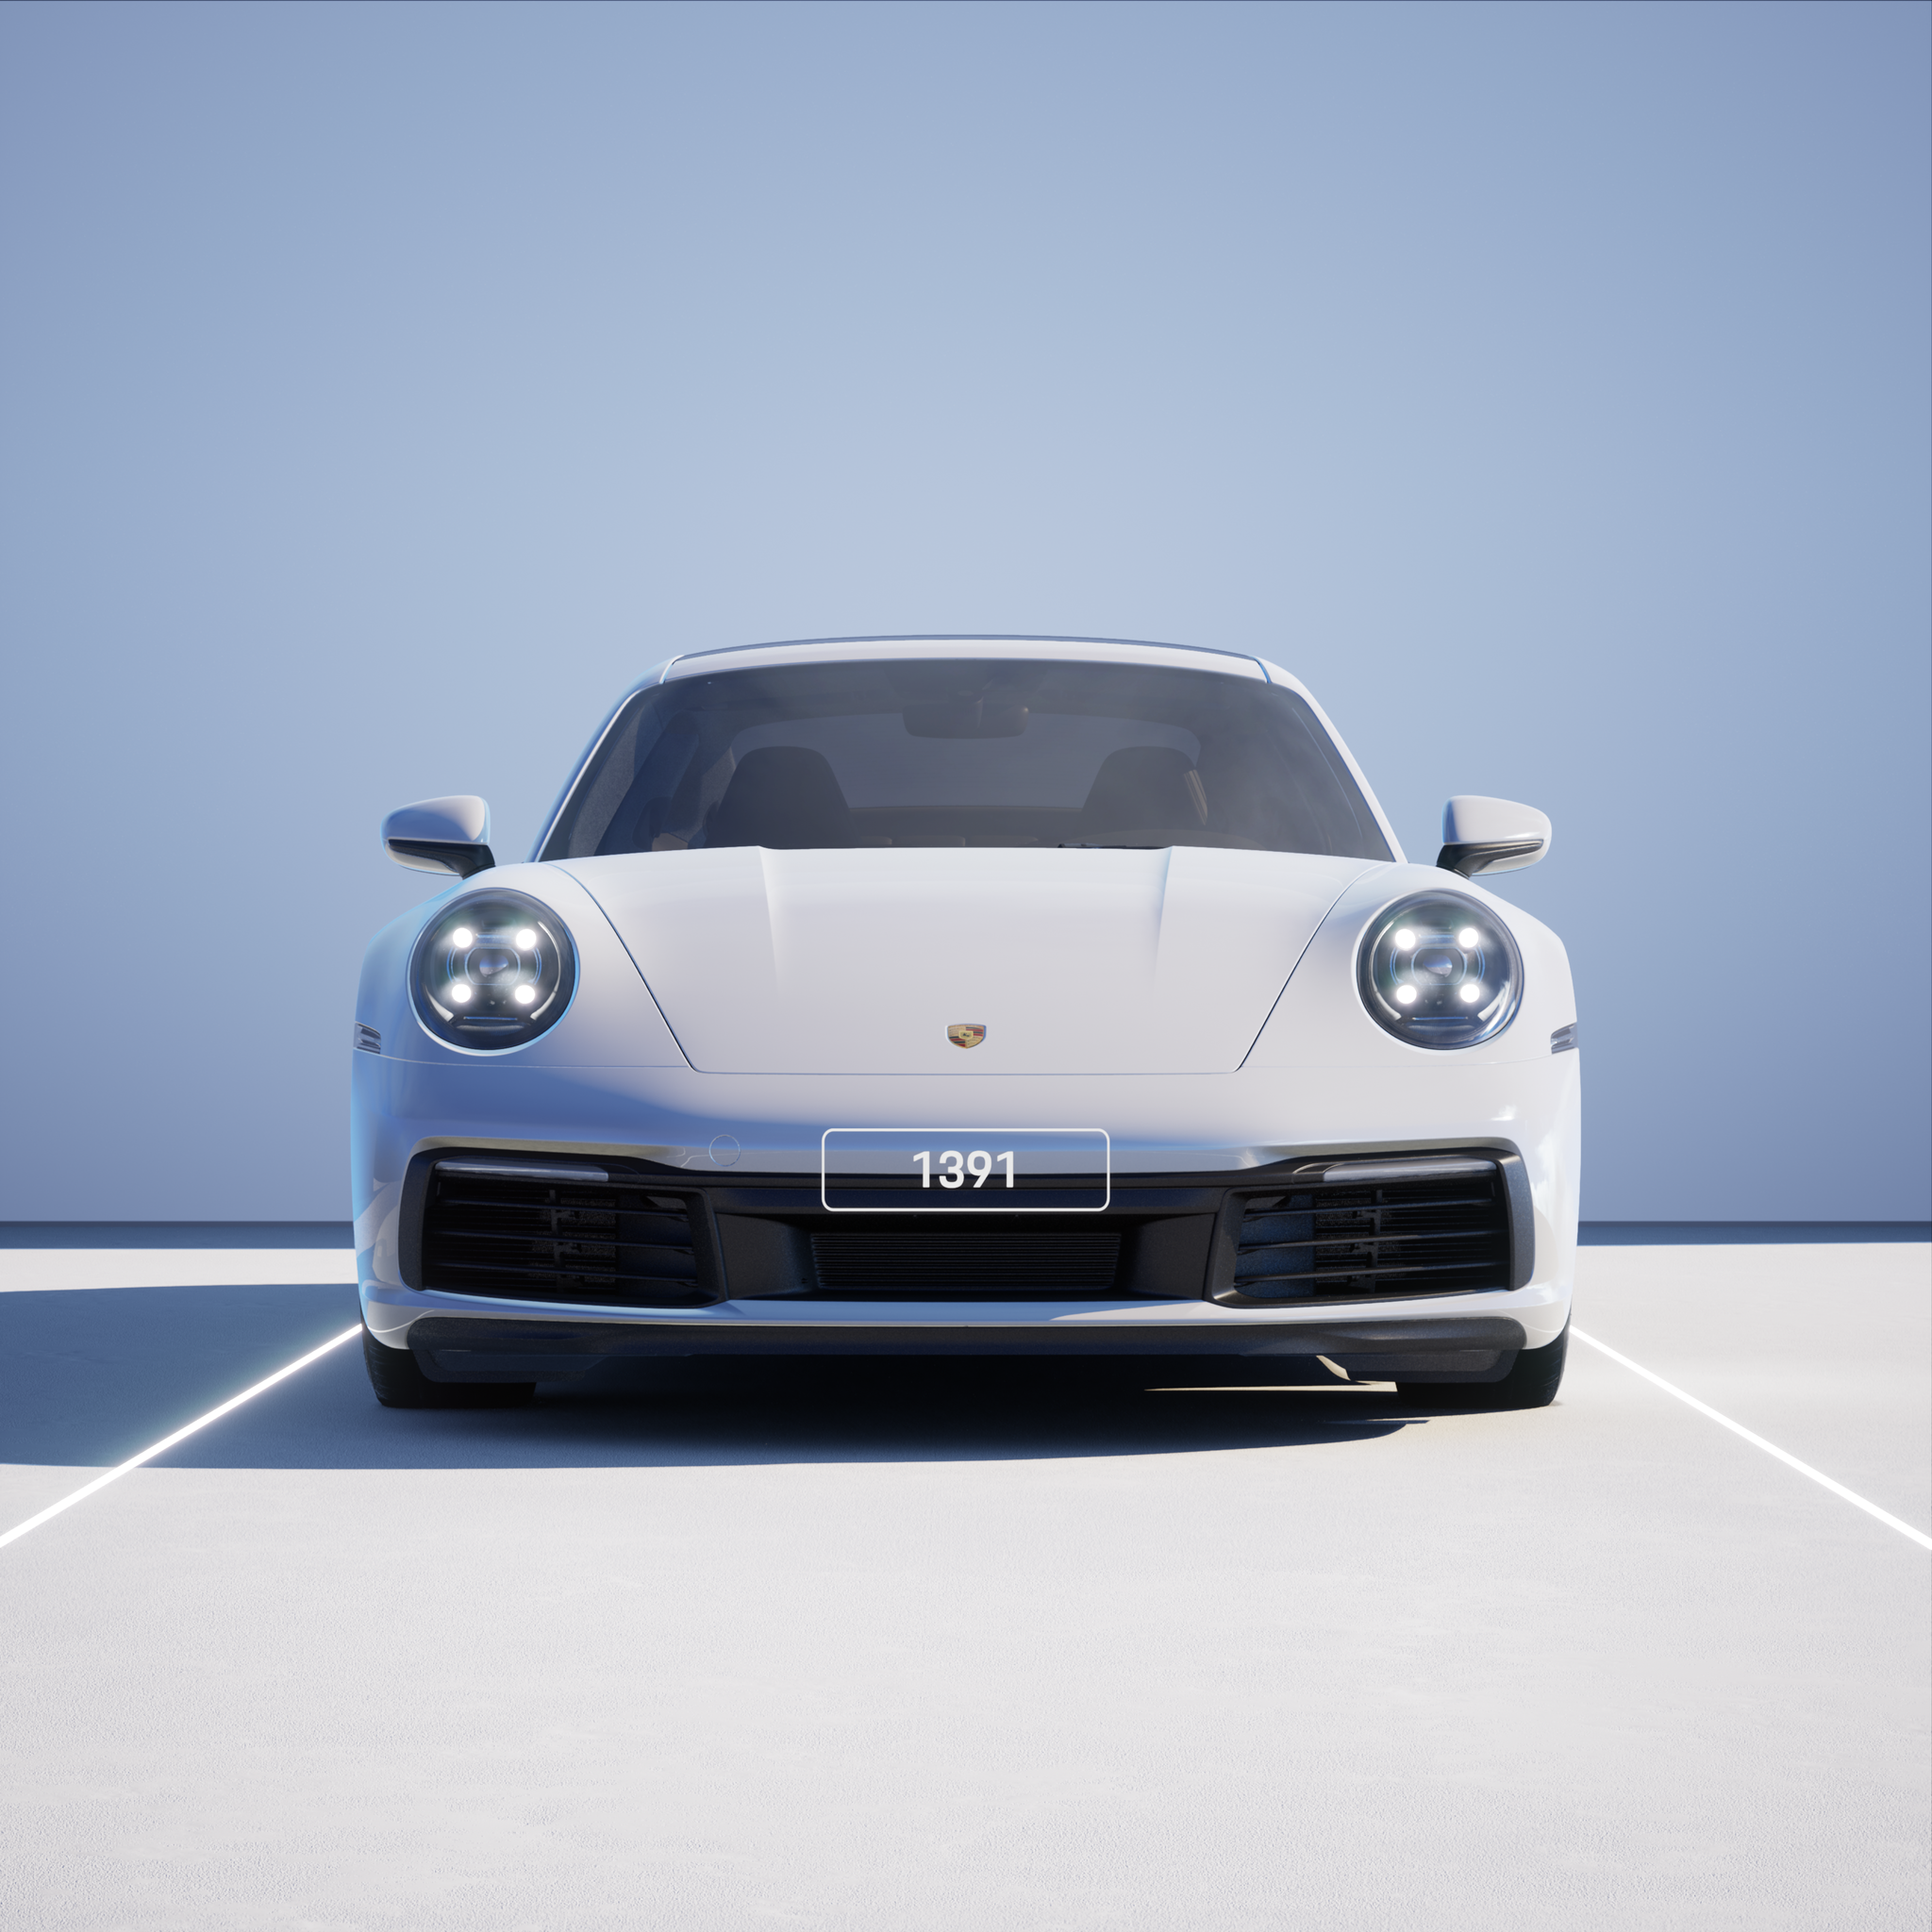 The PORSCHΞ 911 1391 image in phase